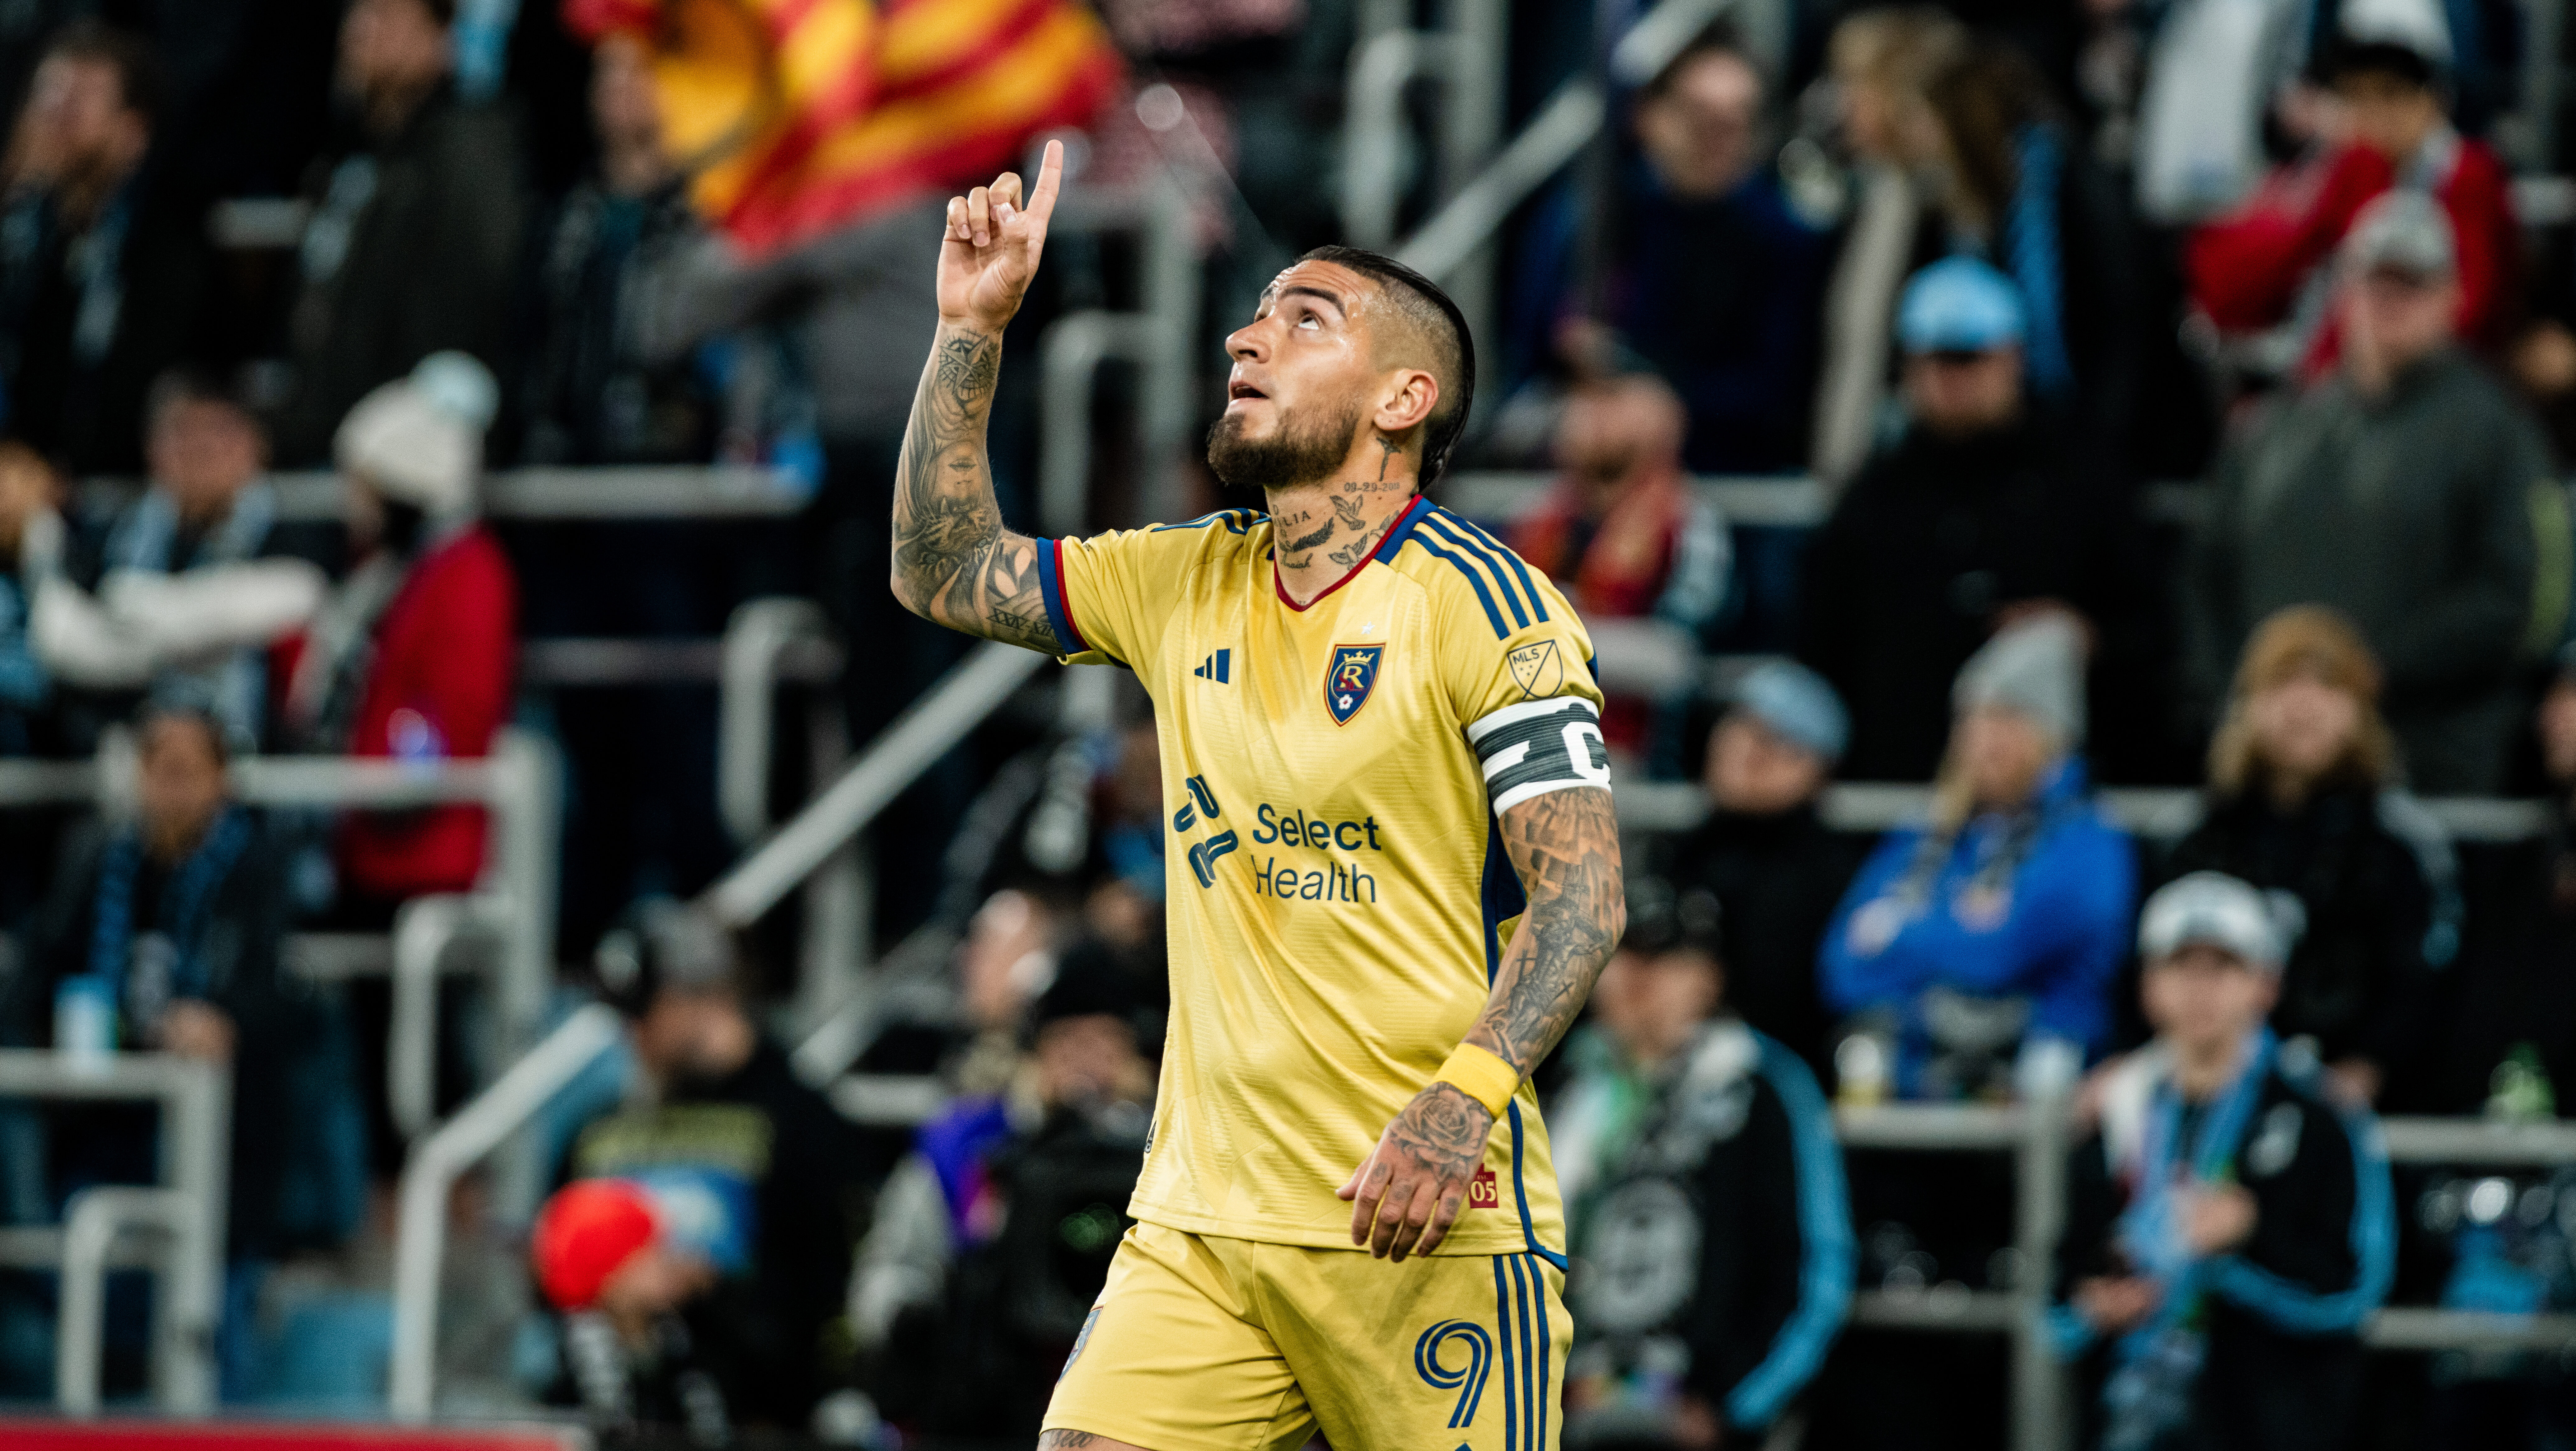 RSL Takes Lead In 89th Minute, Steals Three Points In Philadelphia